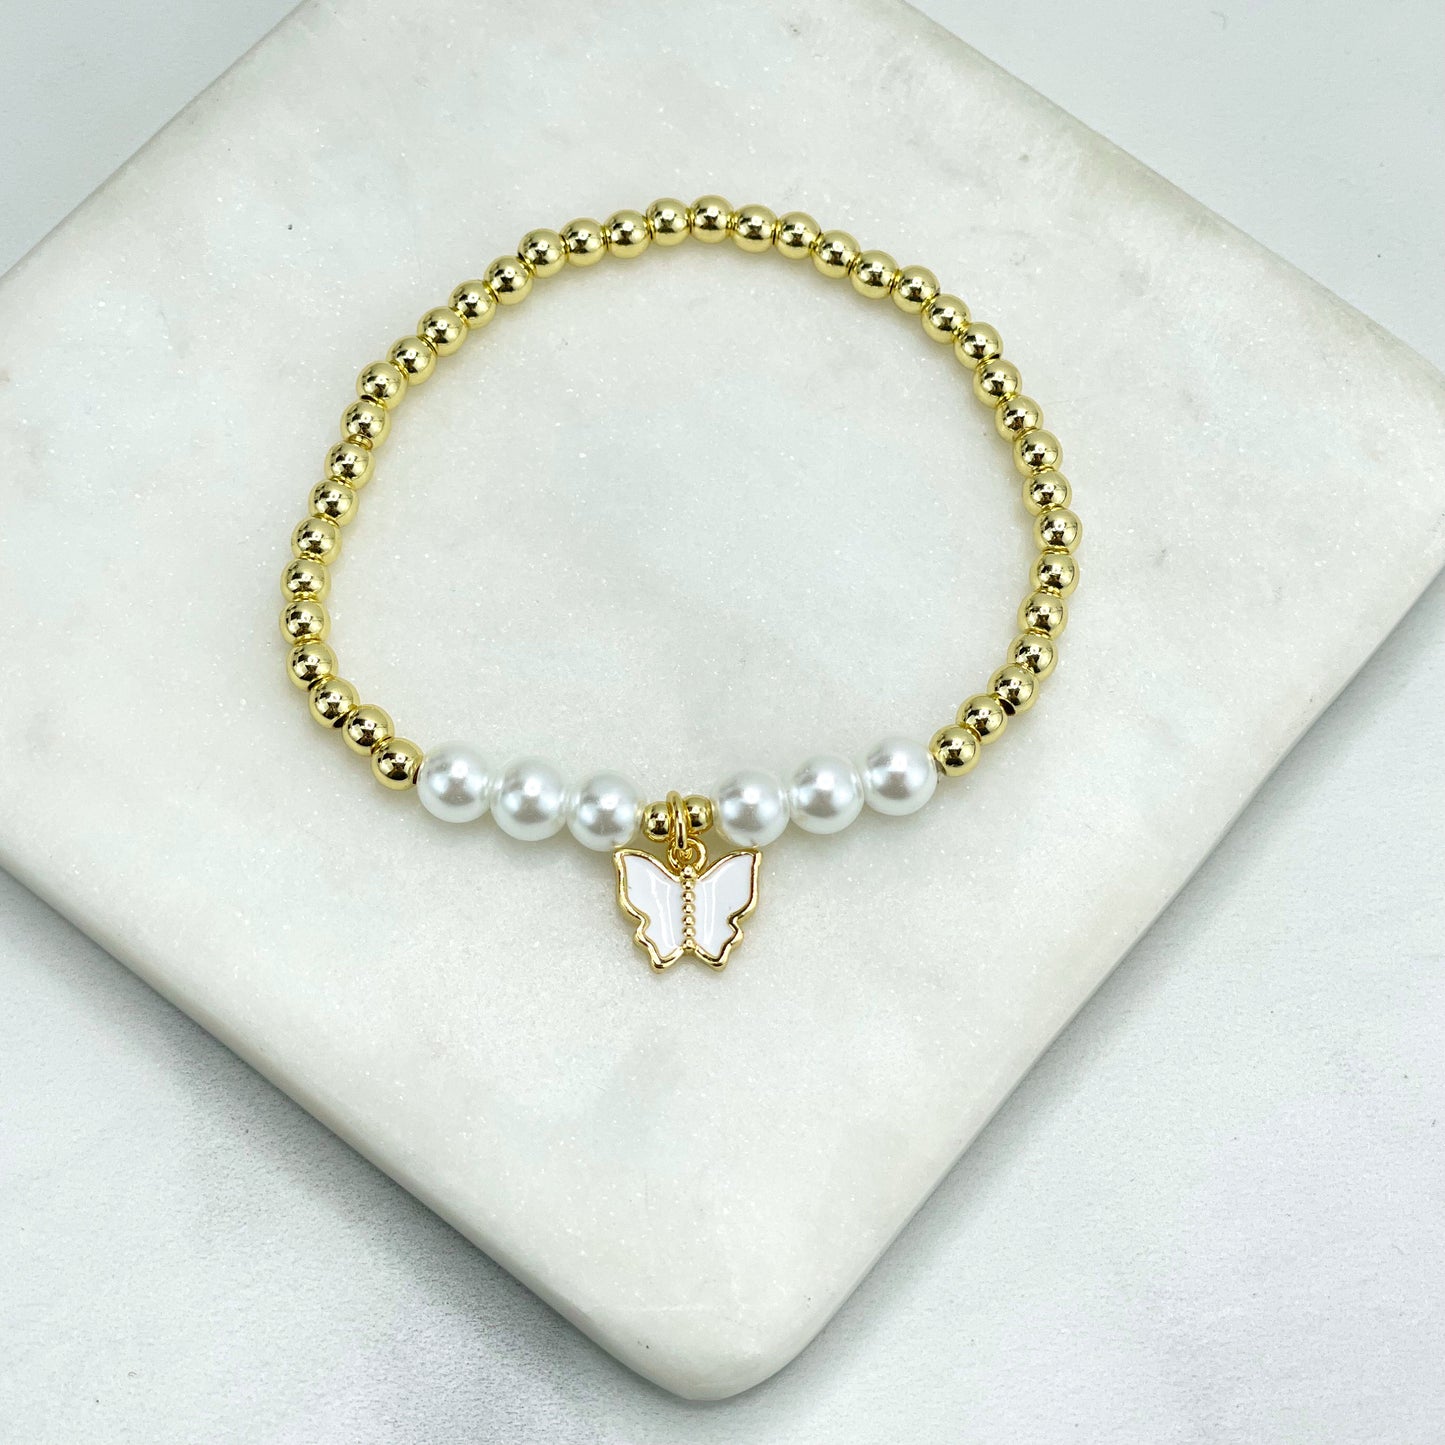 18k Gold Filled Clover, Butterfly or Hamsa Hand Madreperola Charm & Simulated Pearl Beaded Bracelets, Wholesale Jewelry Making Supplies